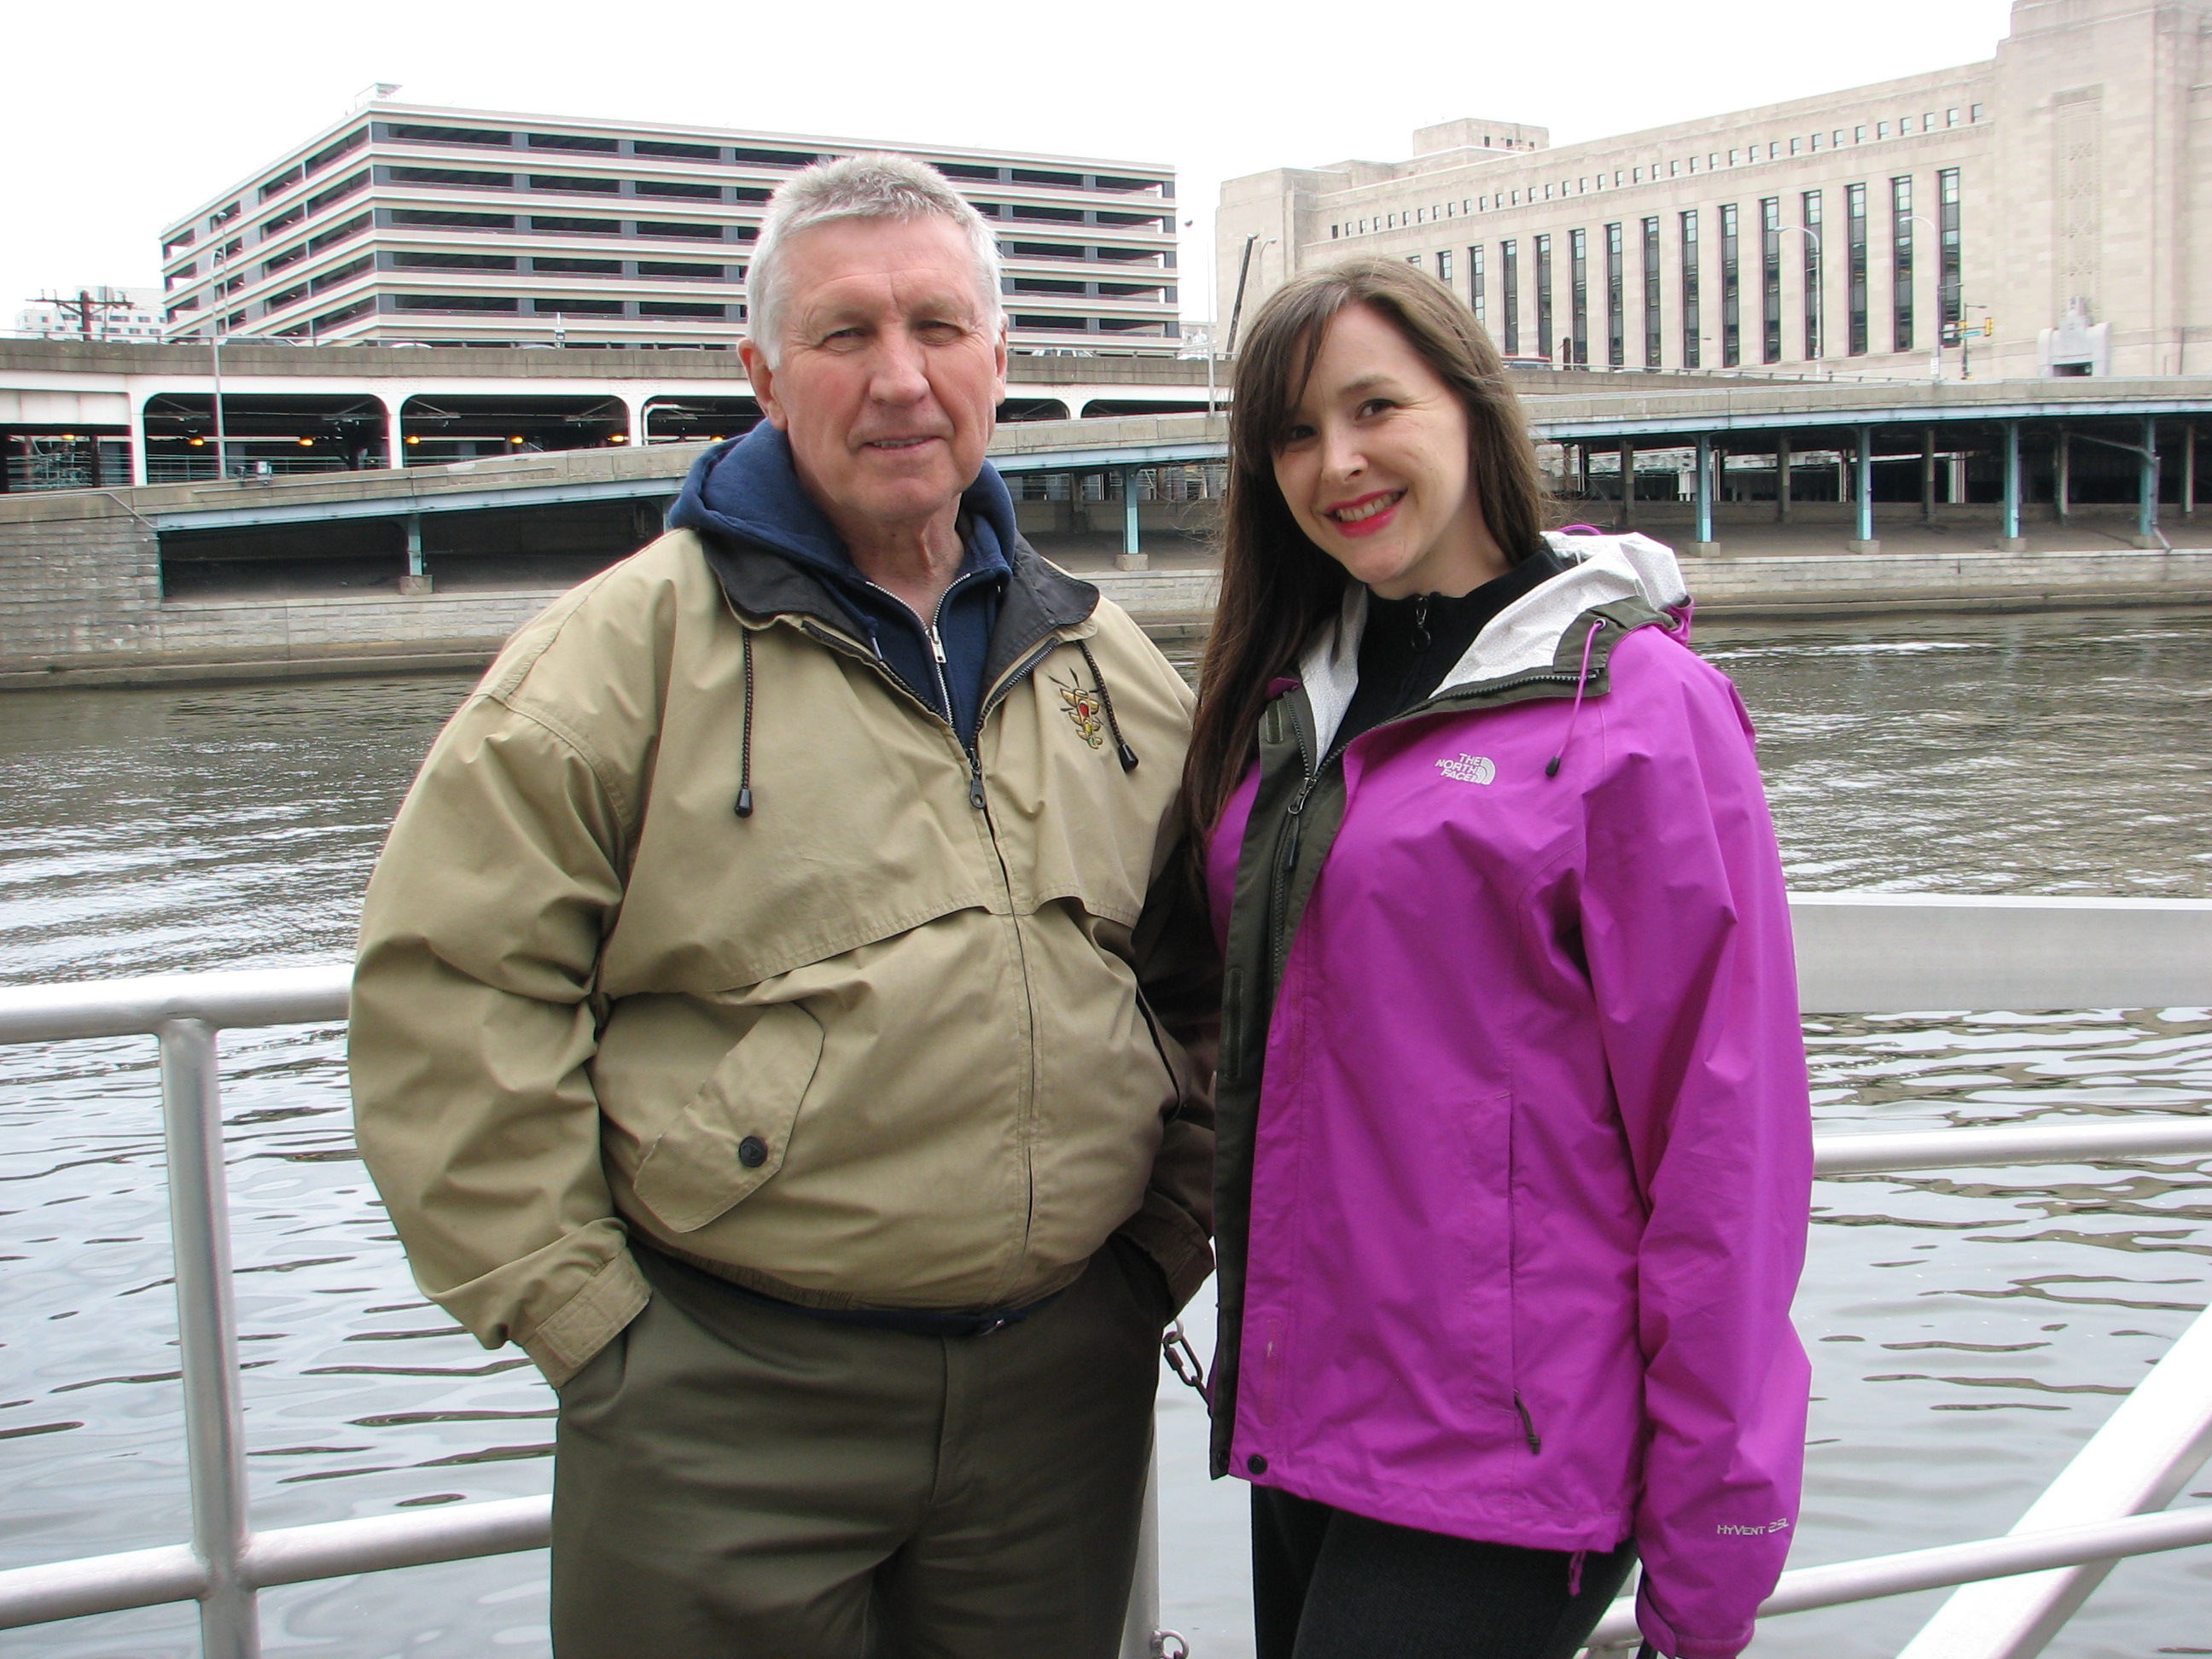 Syrnick and Gray standing on the SRDC's boat launch at Walnut Street along Schulkill Banks, from where river boat tours will depart.